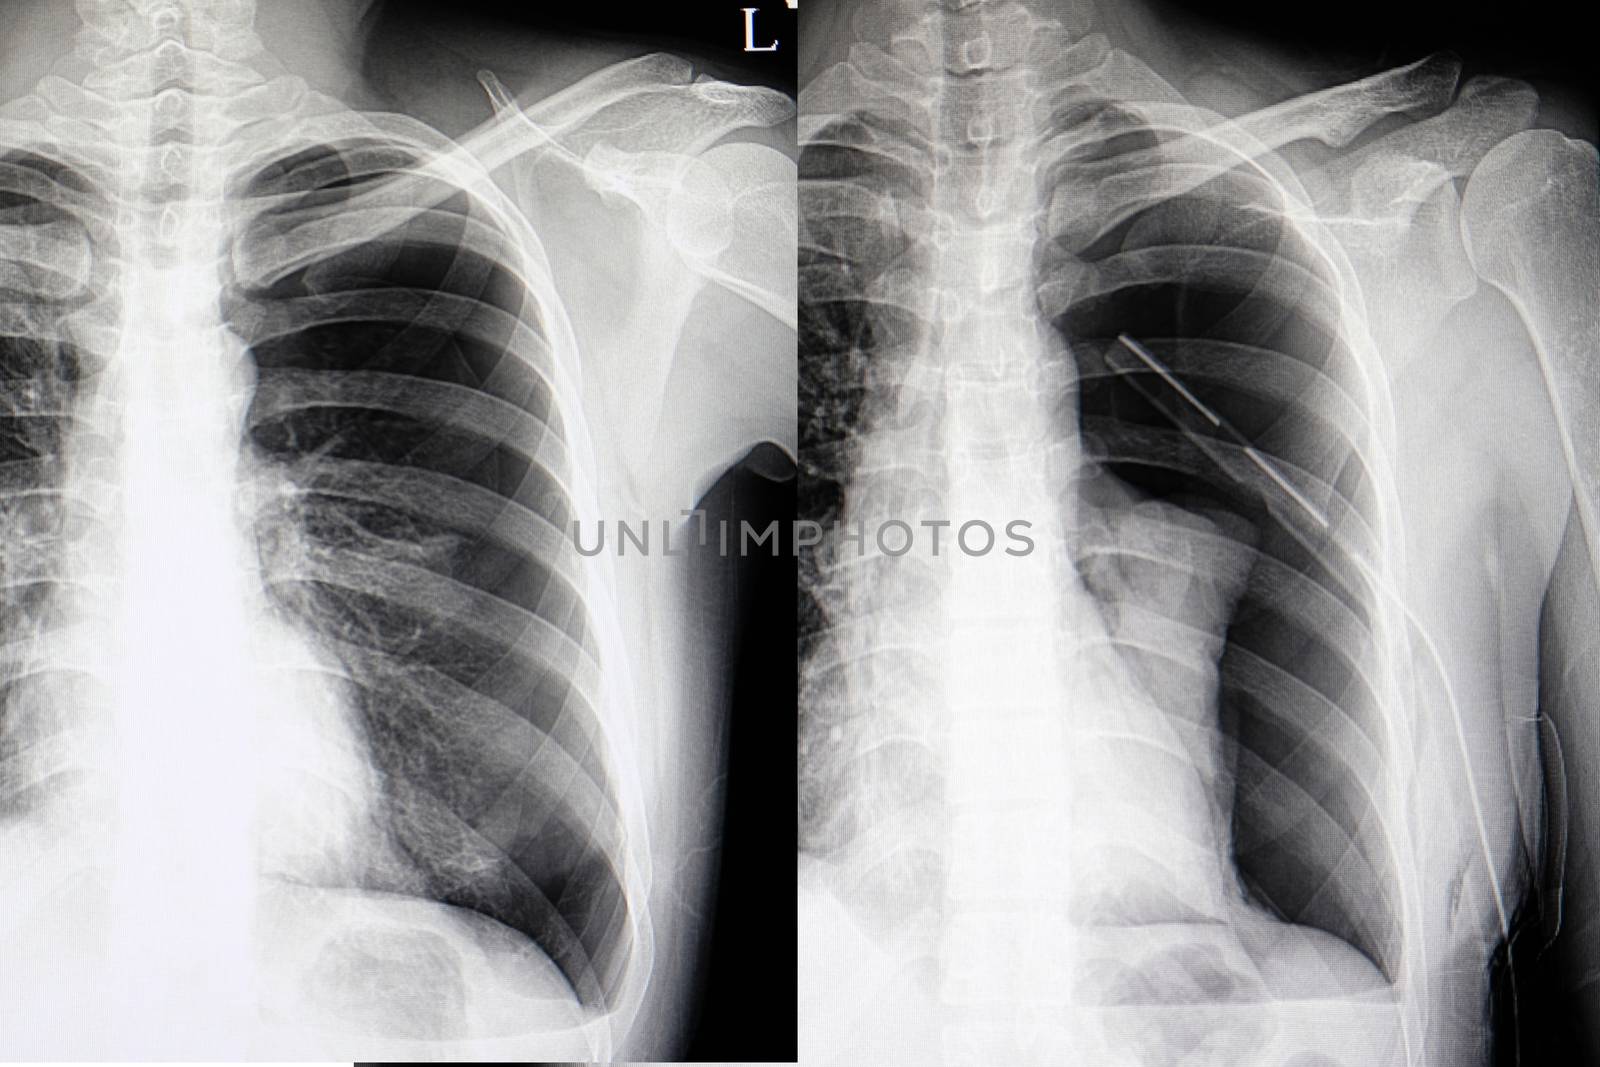 Chest xray films of a patient having spontaneous pneumothorax from ruptured lung bleb, showing a chest drain tube in his left lung.